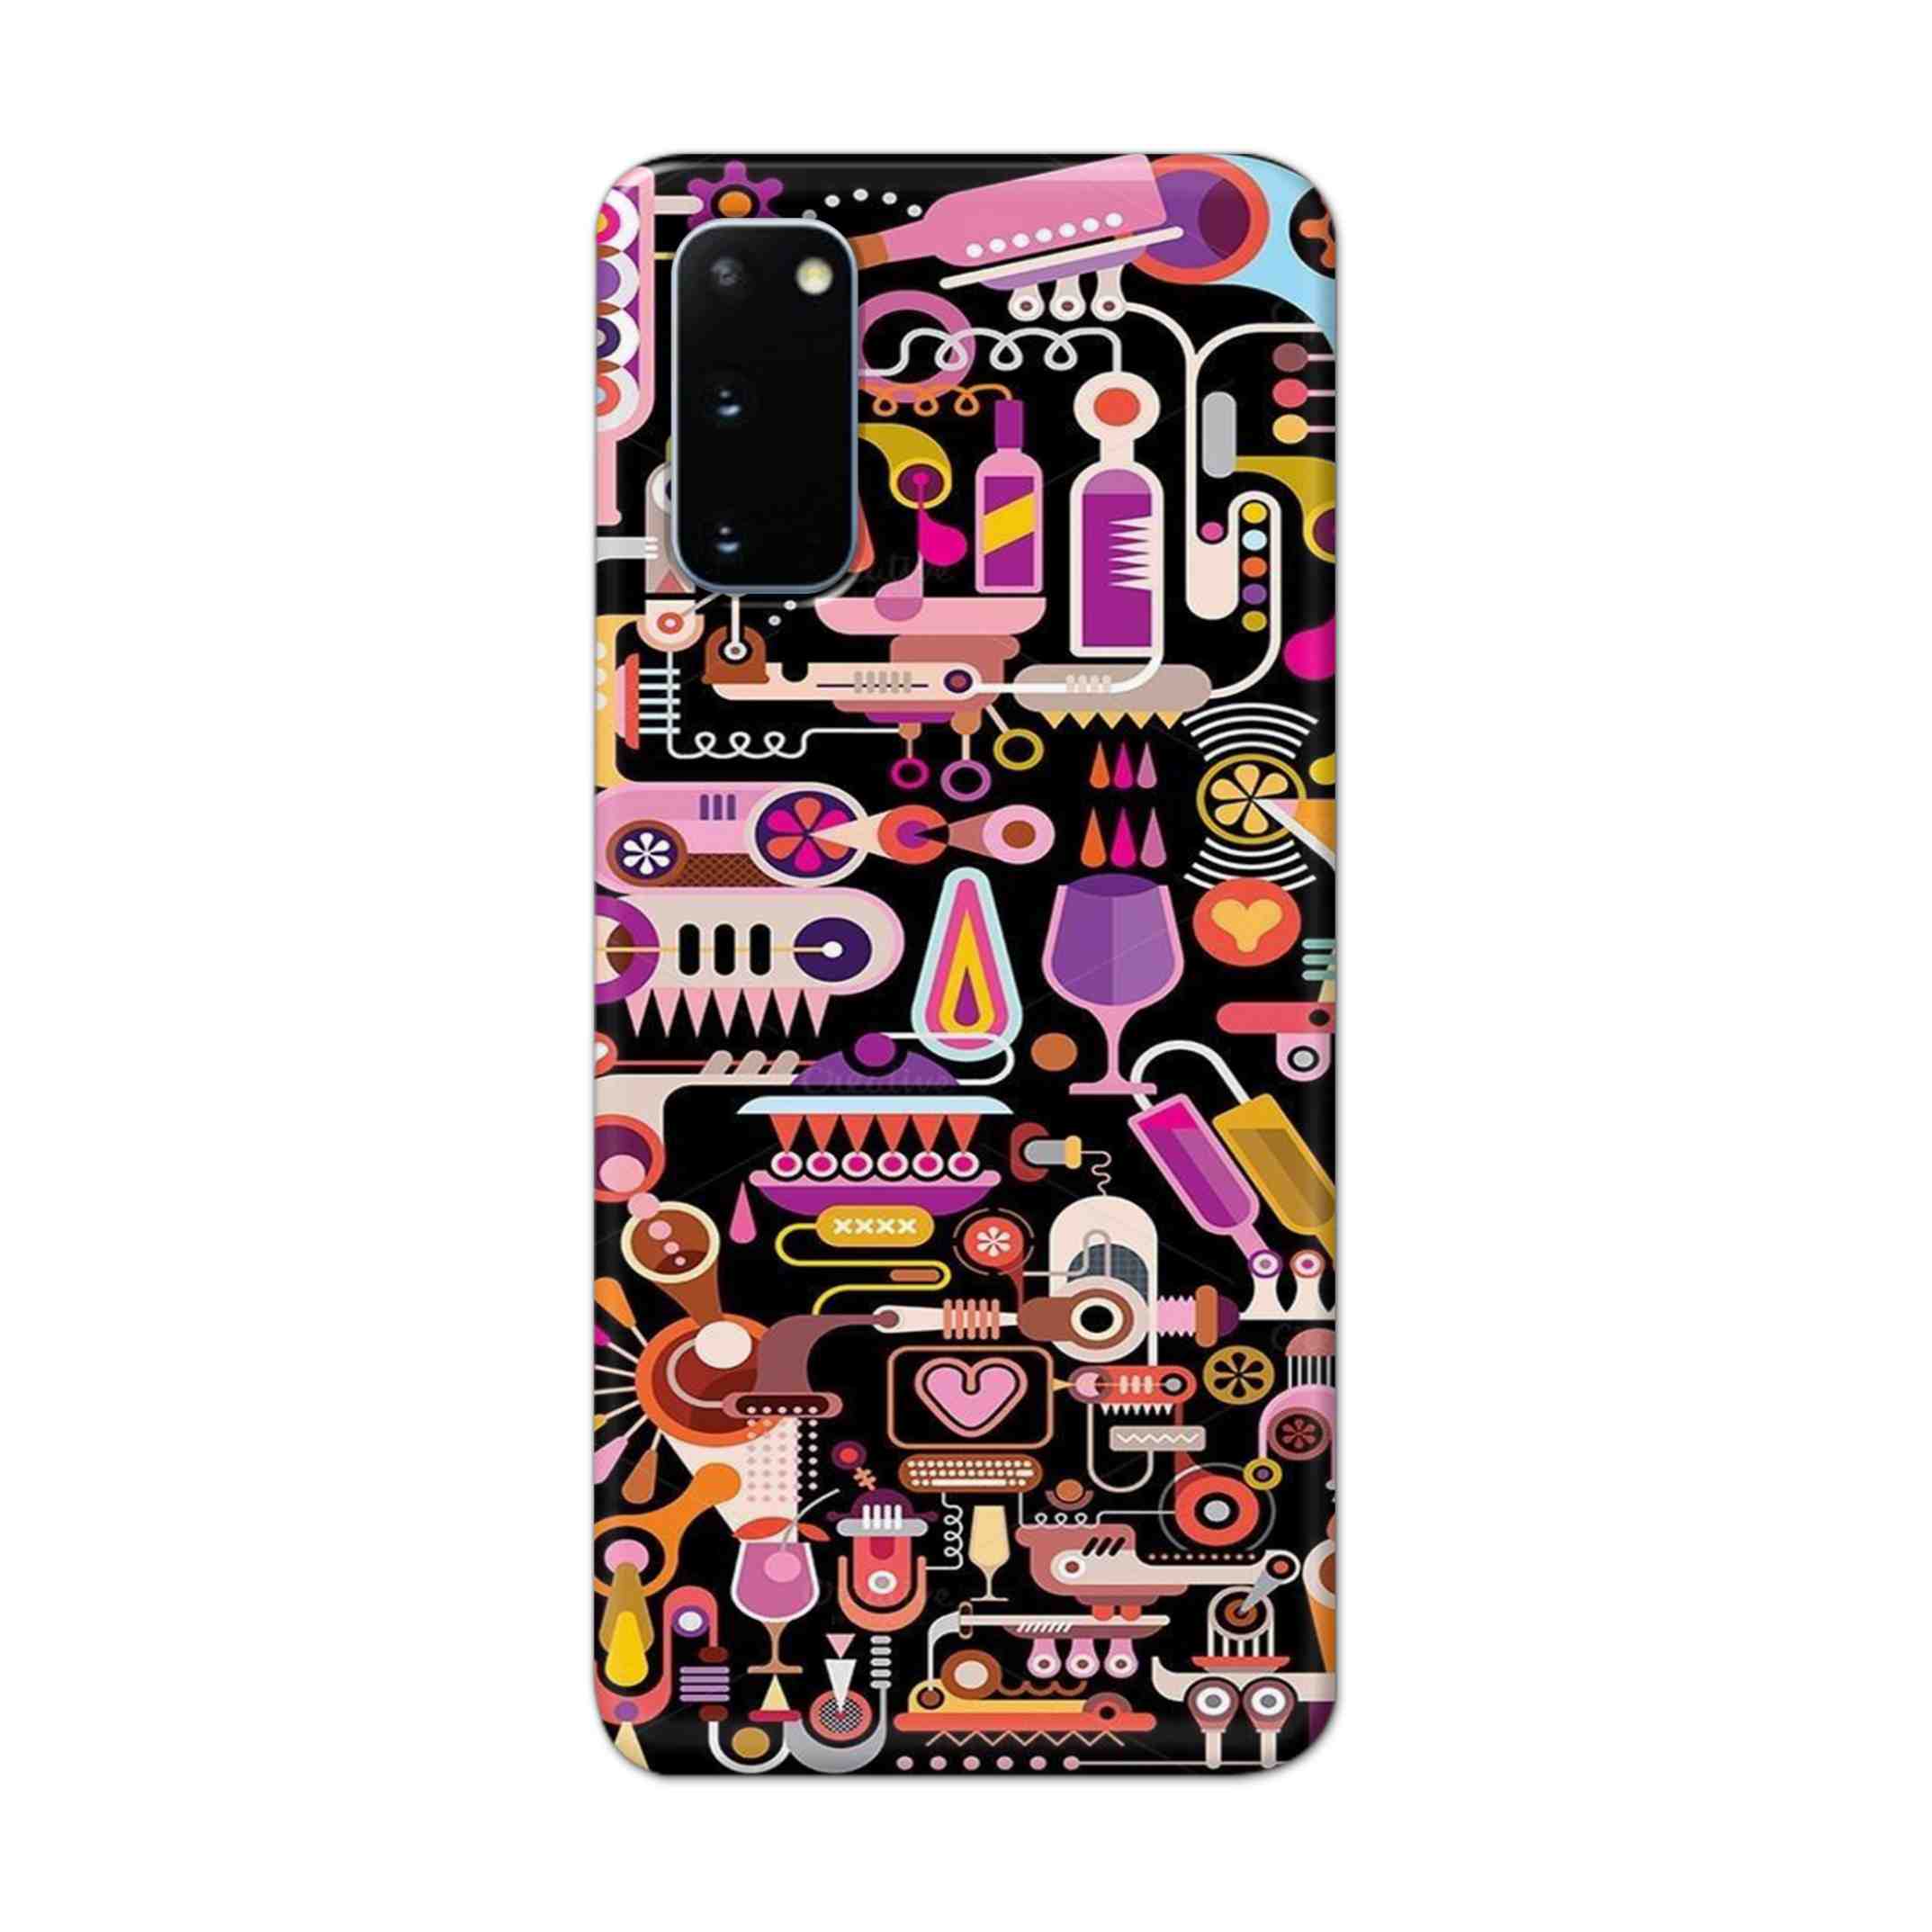 Buy Lab Art Hard Back Mobile Phone Case Cover For Samsung Galaxy S20 Online